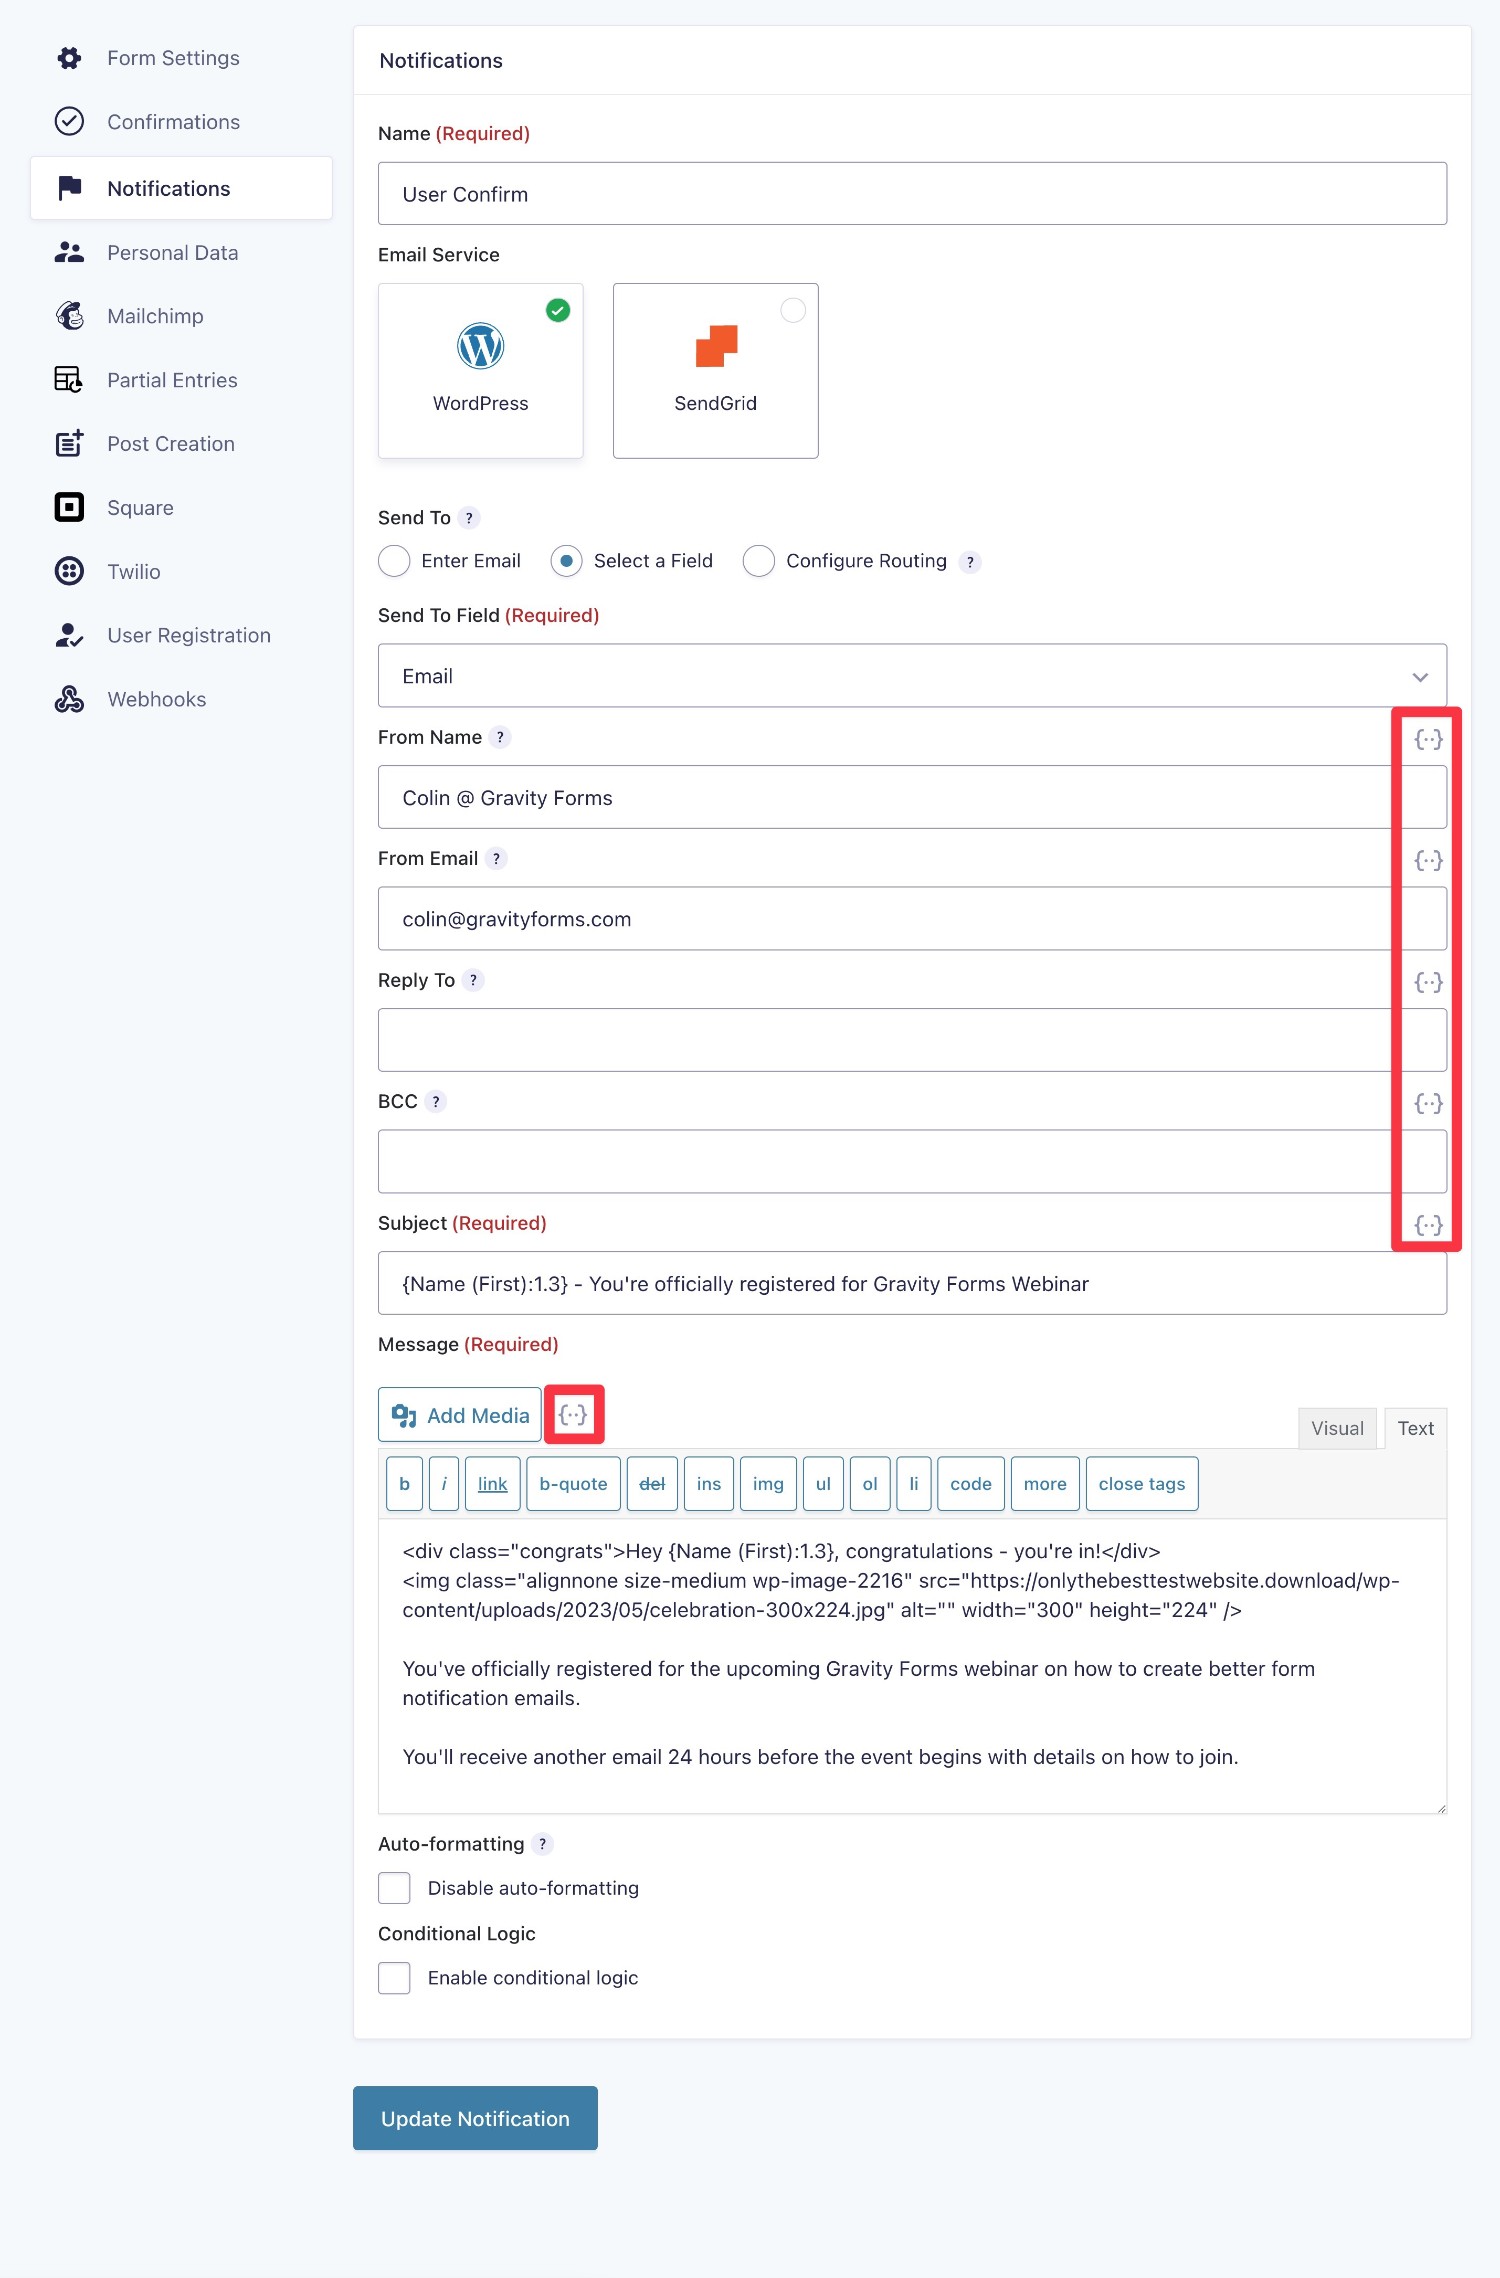 How to customize the content of your form notification email